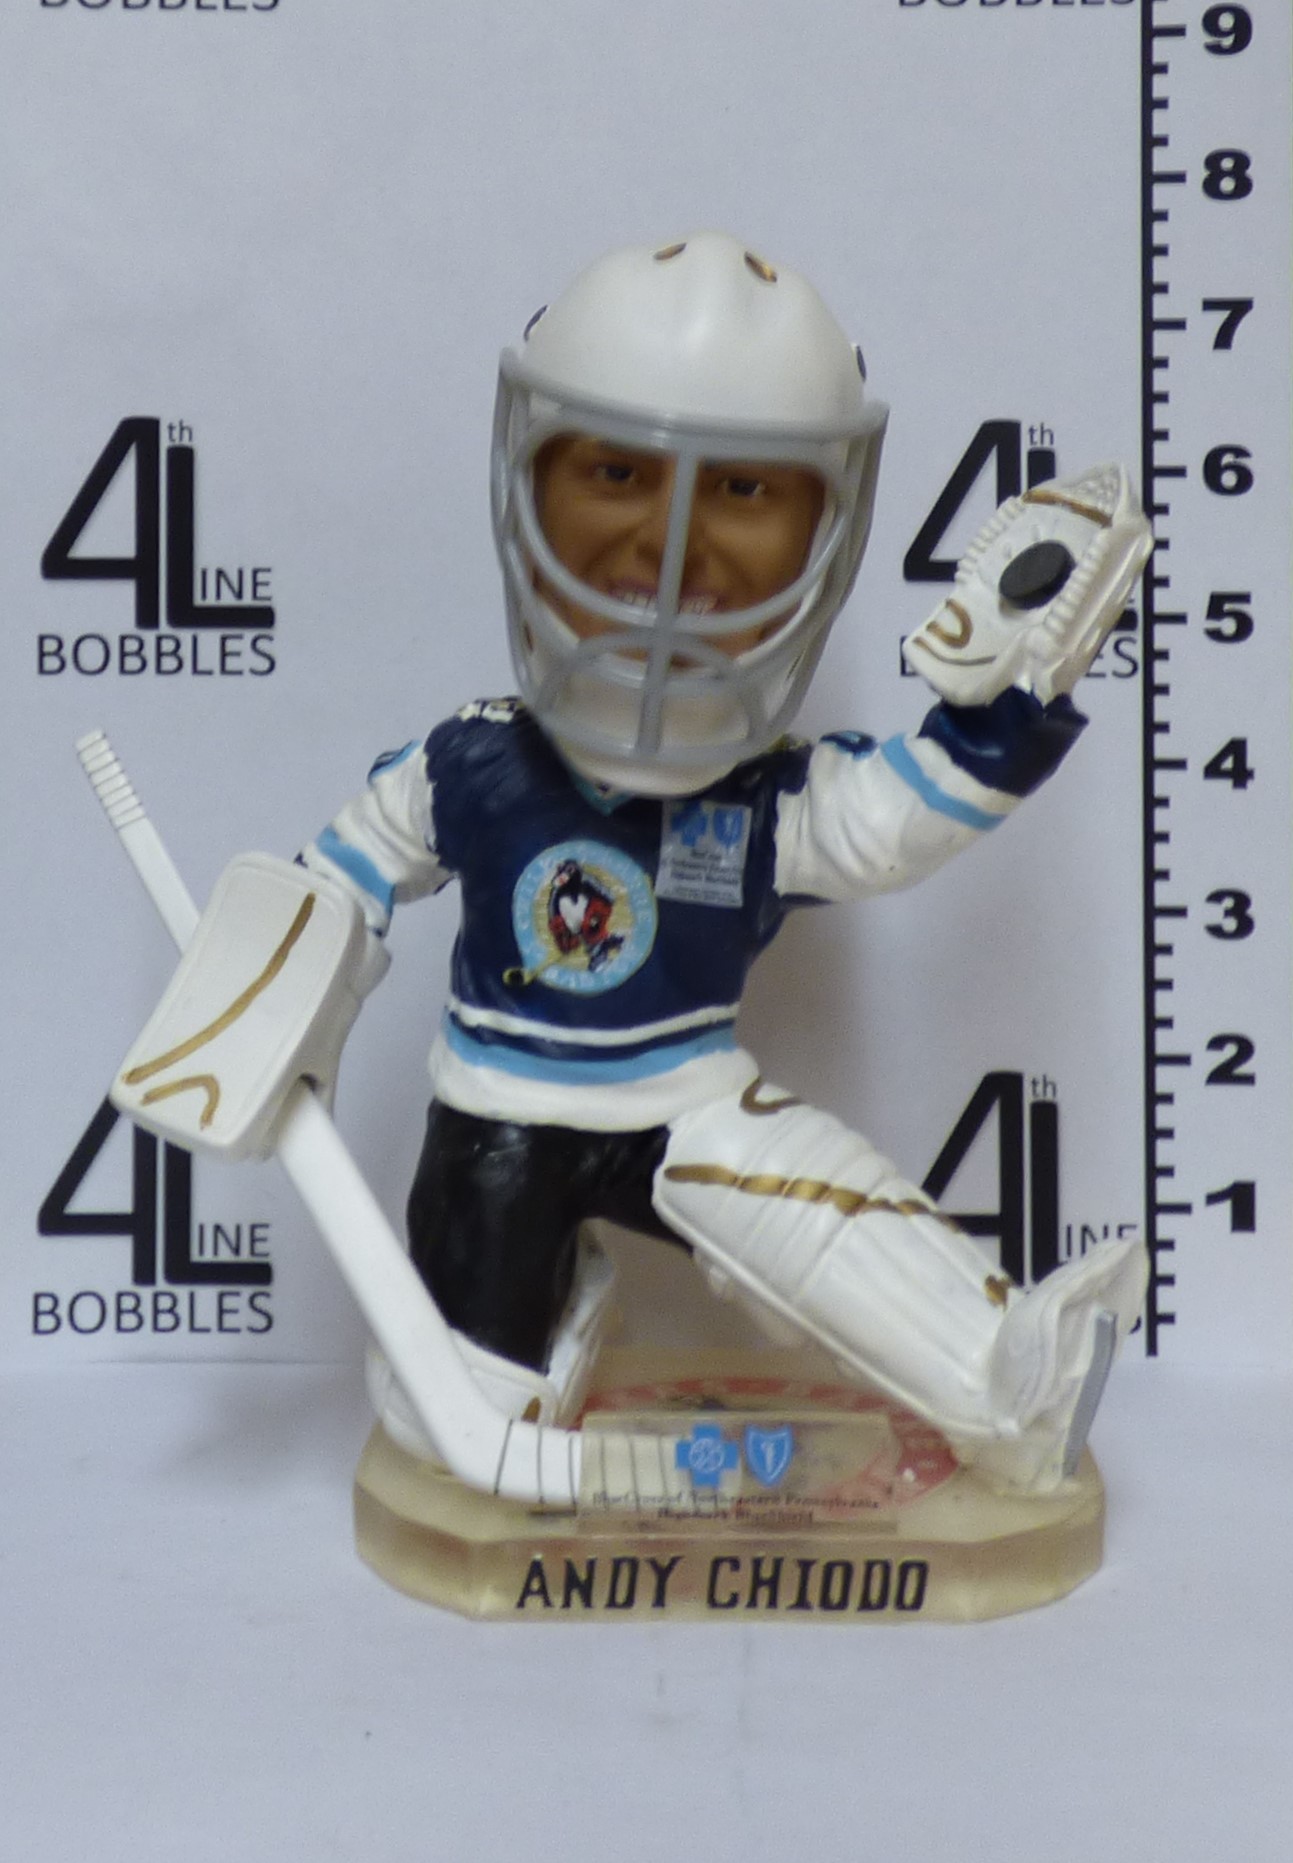 Andy Chiodo bobblehead